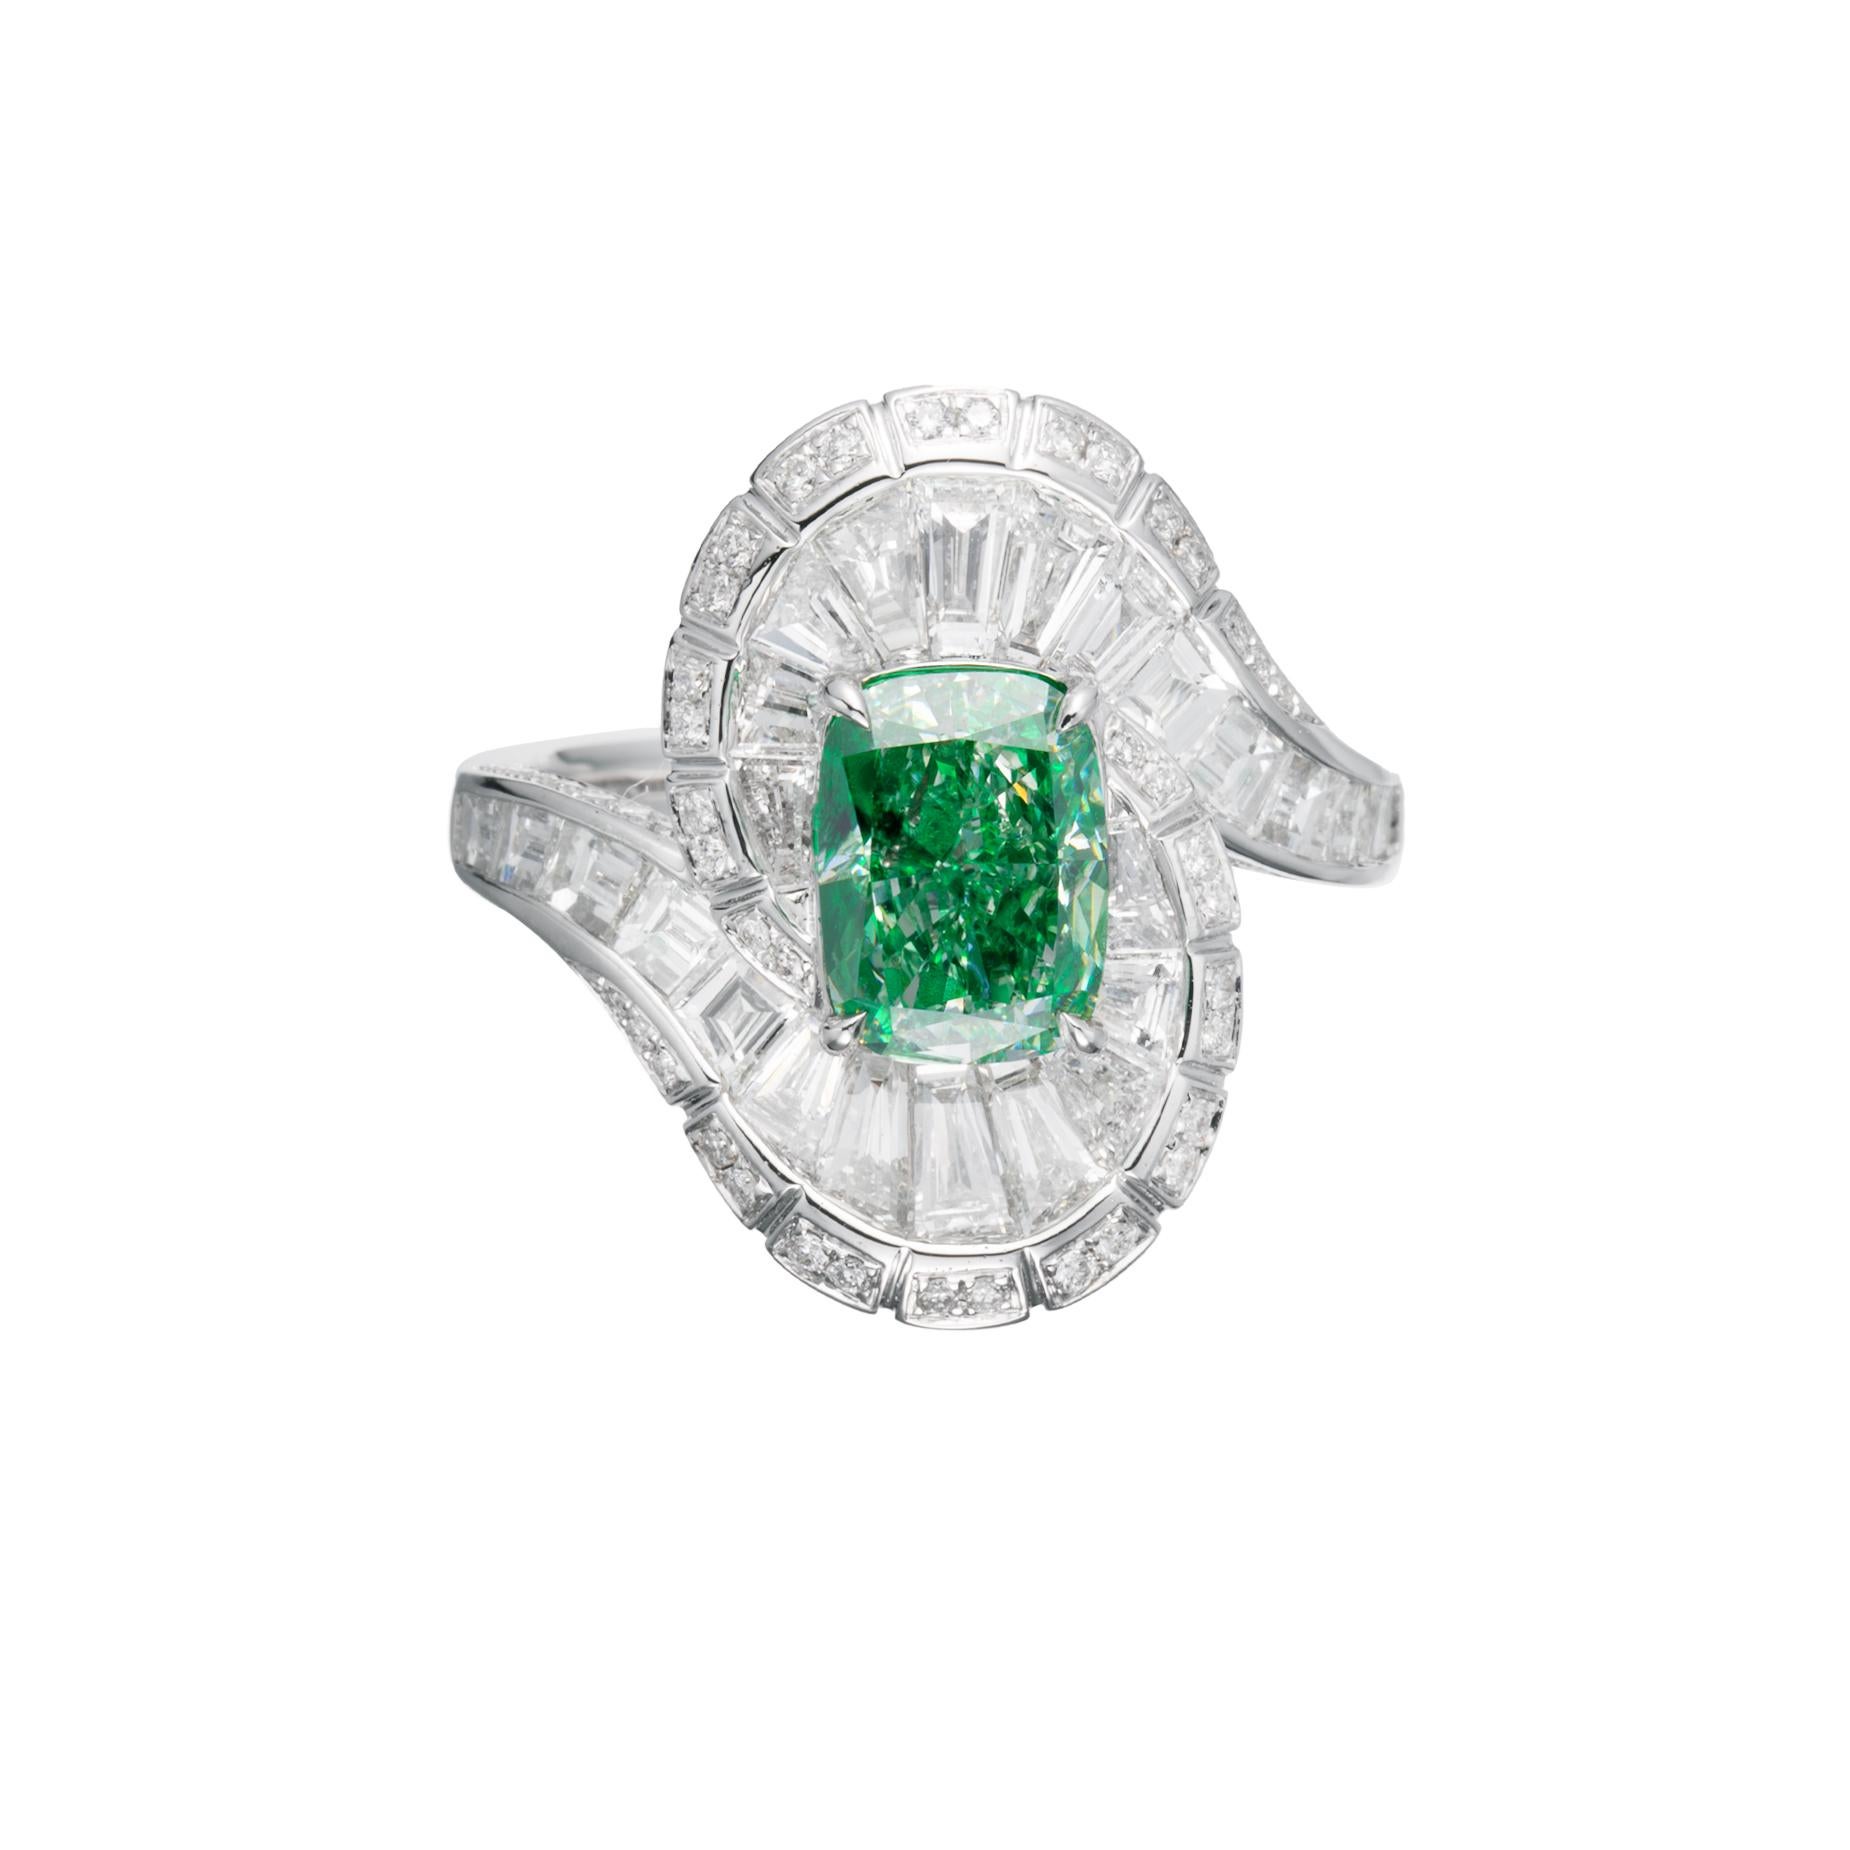 This exquisite ring features a stunning 2.02 carat natural cushion-shaped diamond set in an elegant 18kt gold band. The focal point of this ring is a GIA-certified Fancy Yellowish Green diamond, boasting a unique and rare hue that exudes a